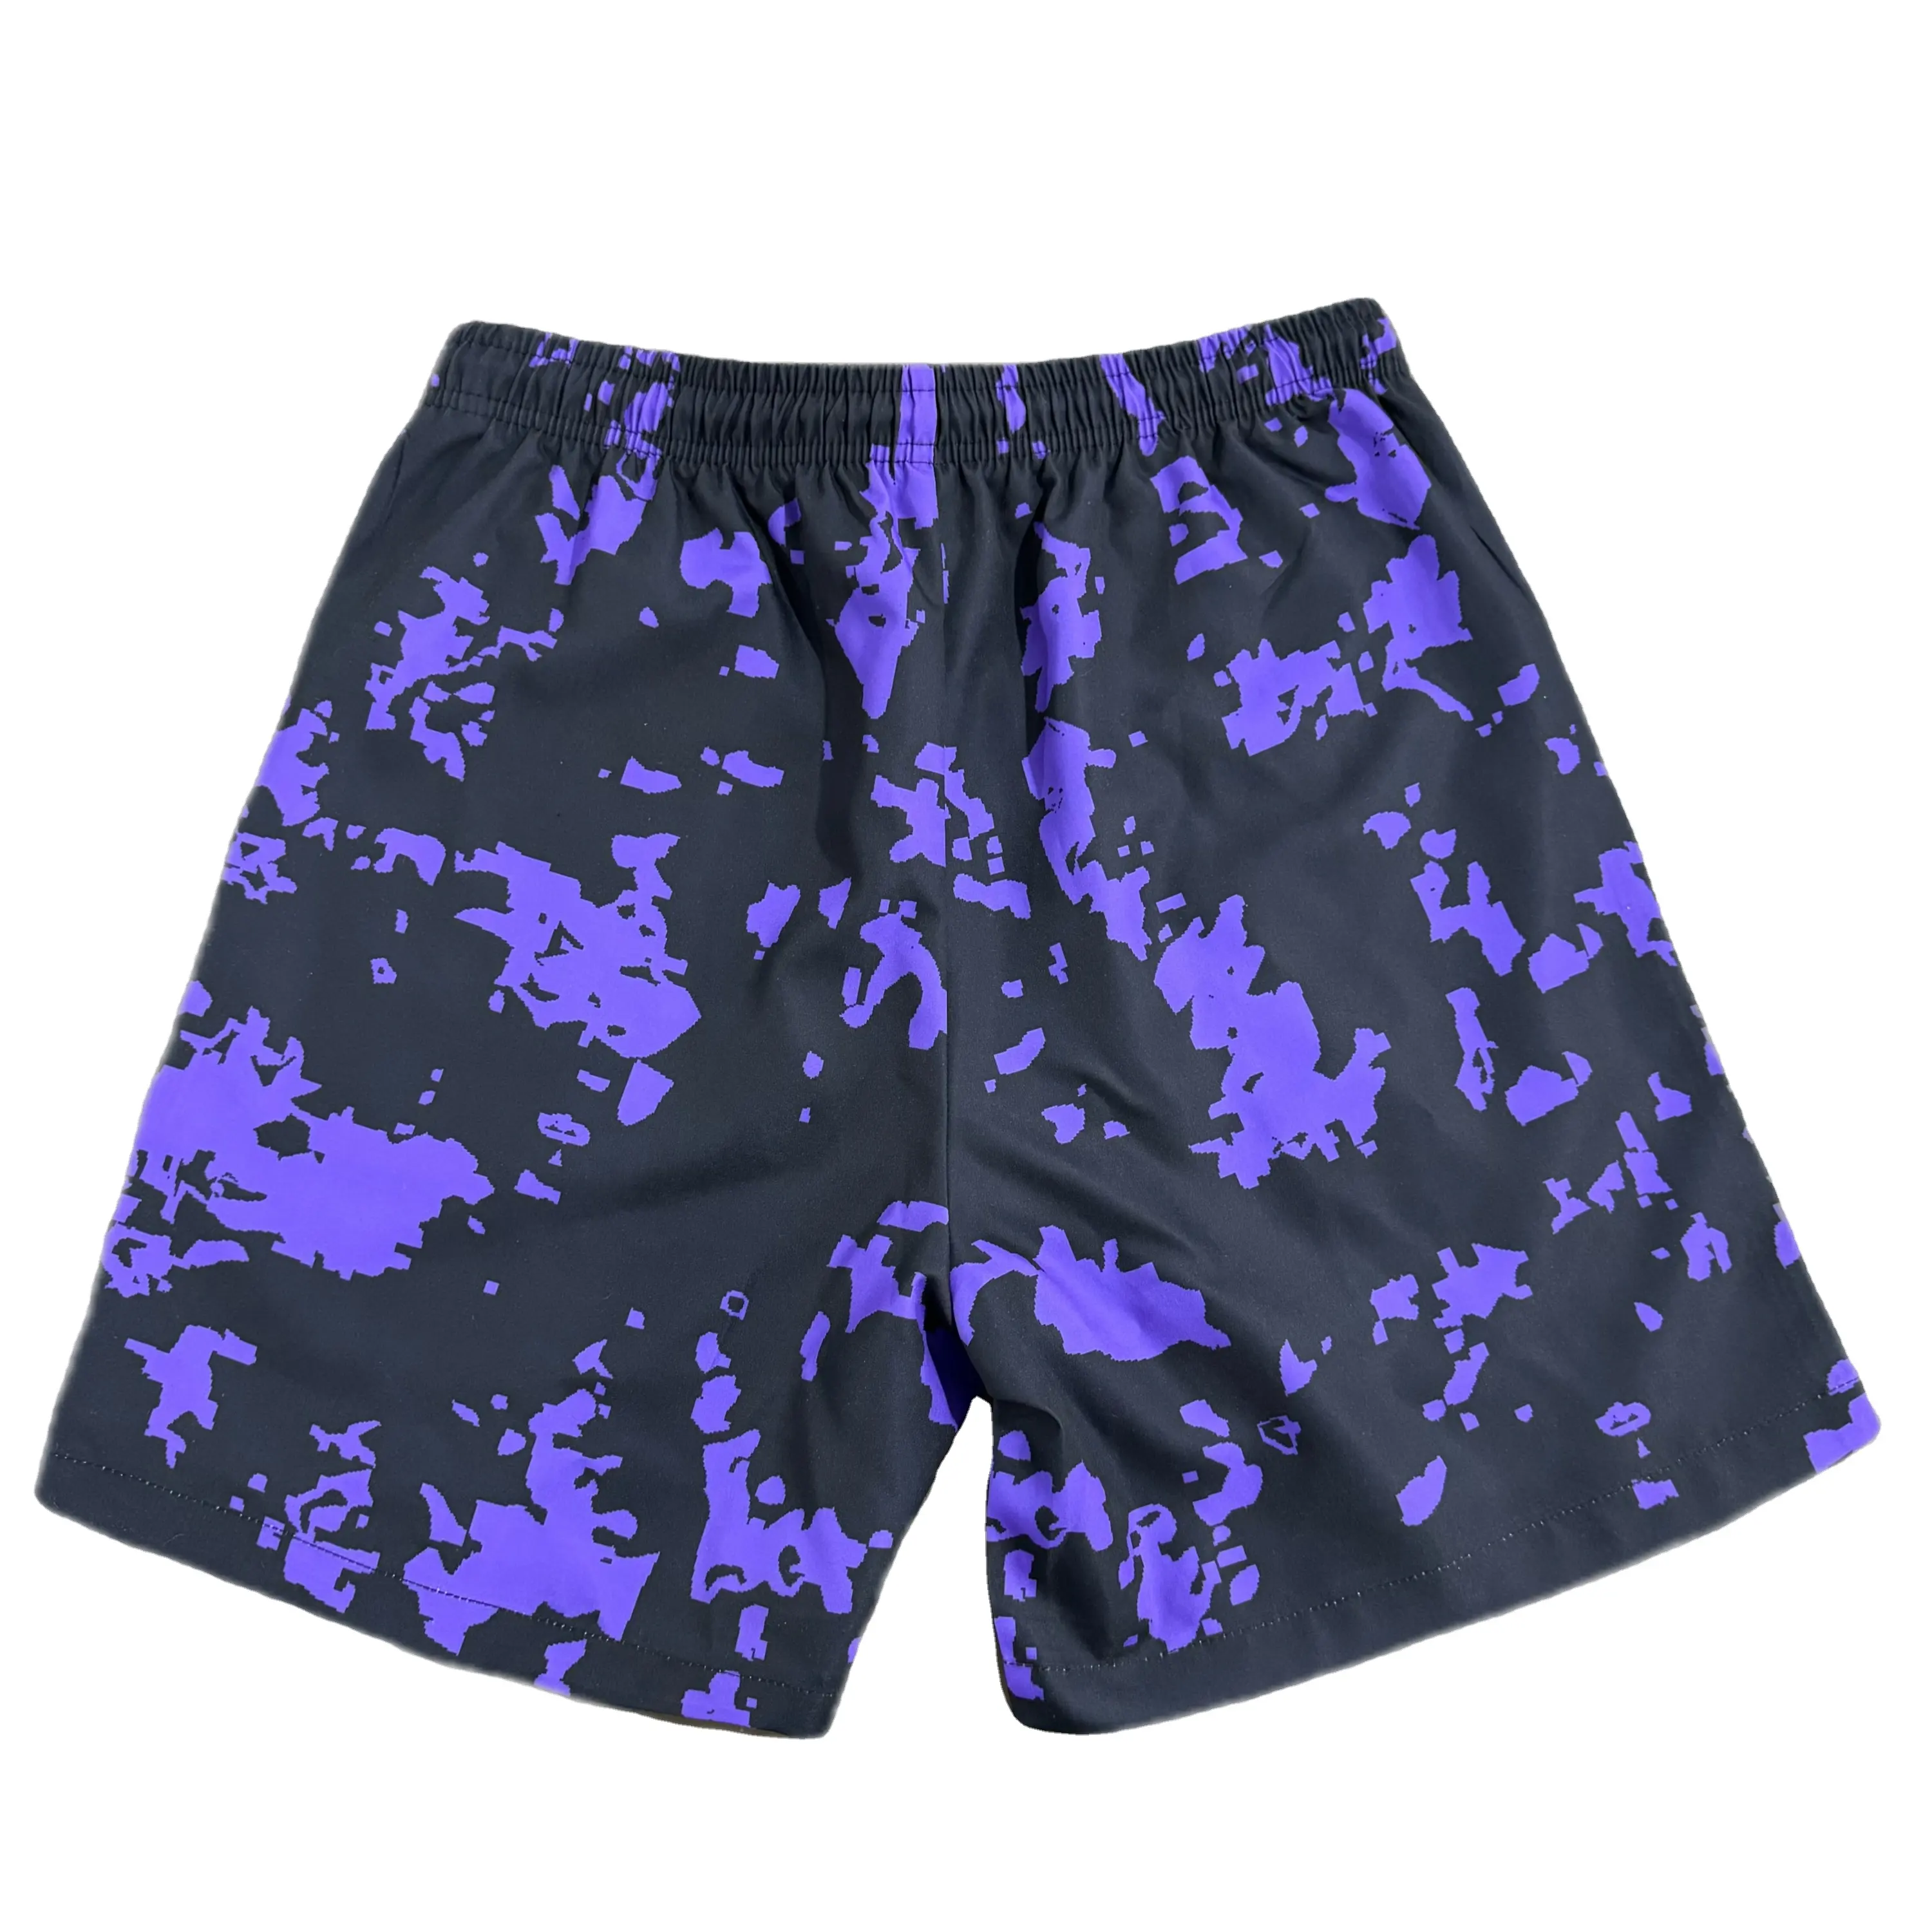 In summer, men's shorts are worn with thin sporty and trendy quick-drying beach pants